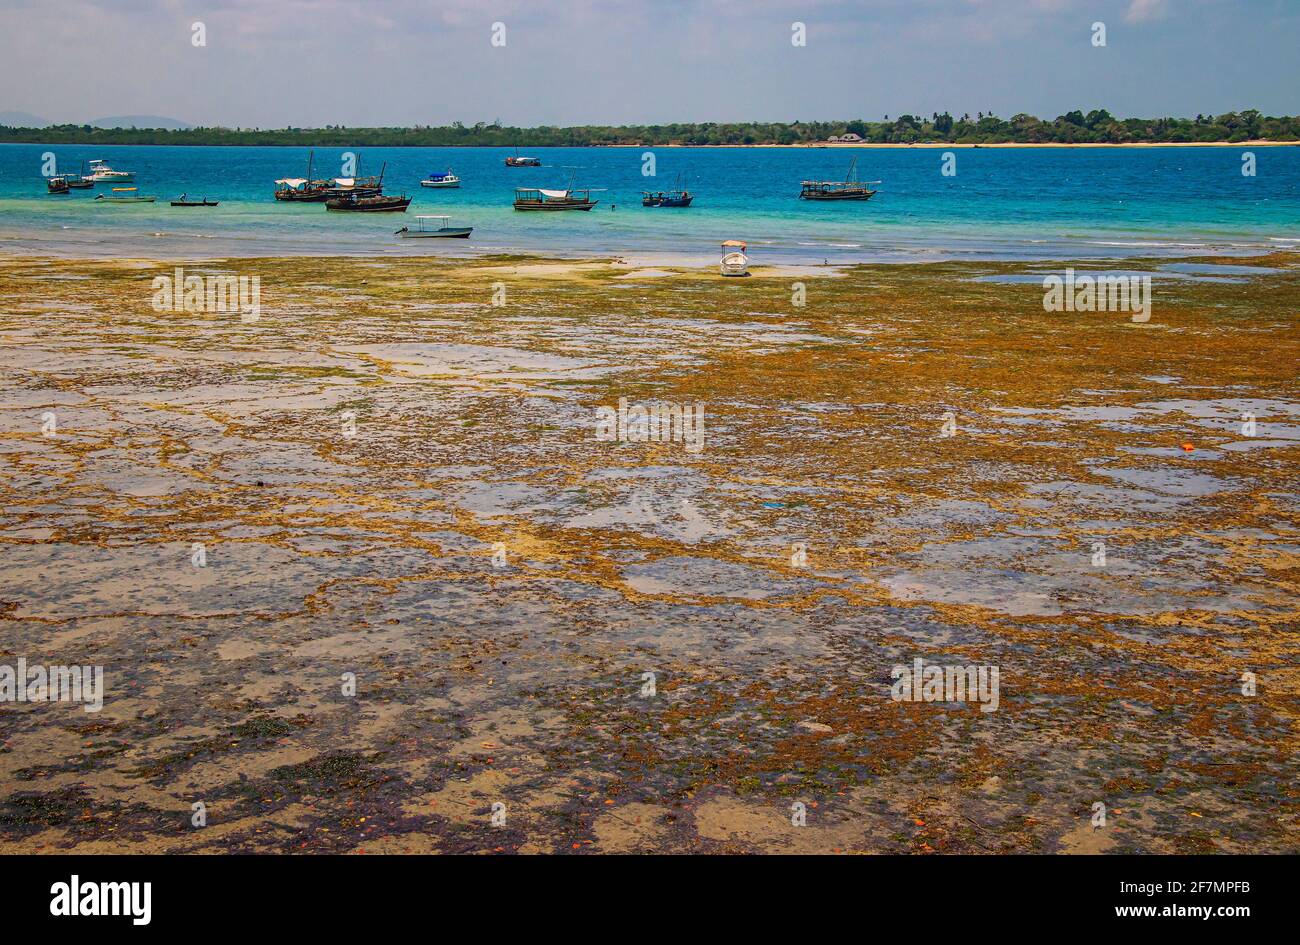 Big low tide on Wasini island in Kenya, Africa. The sea is far from the shore. Stock Photo